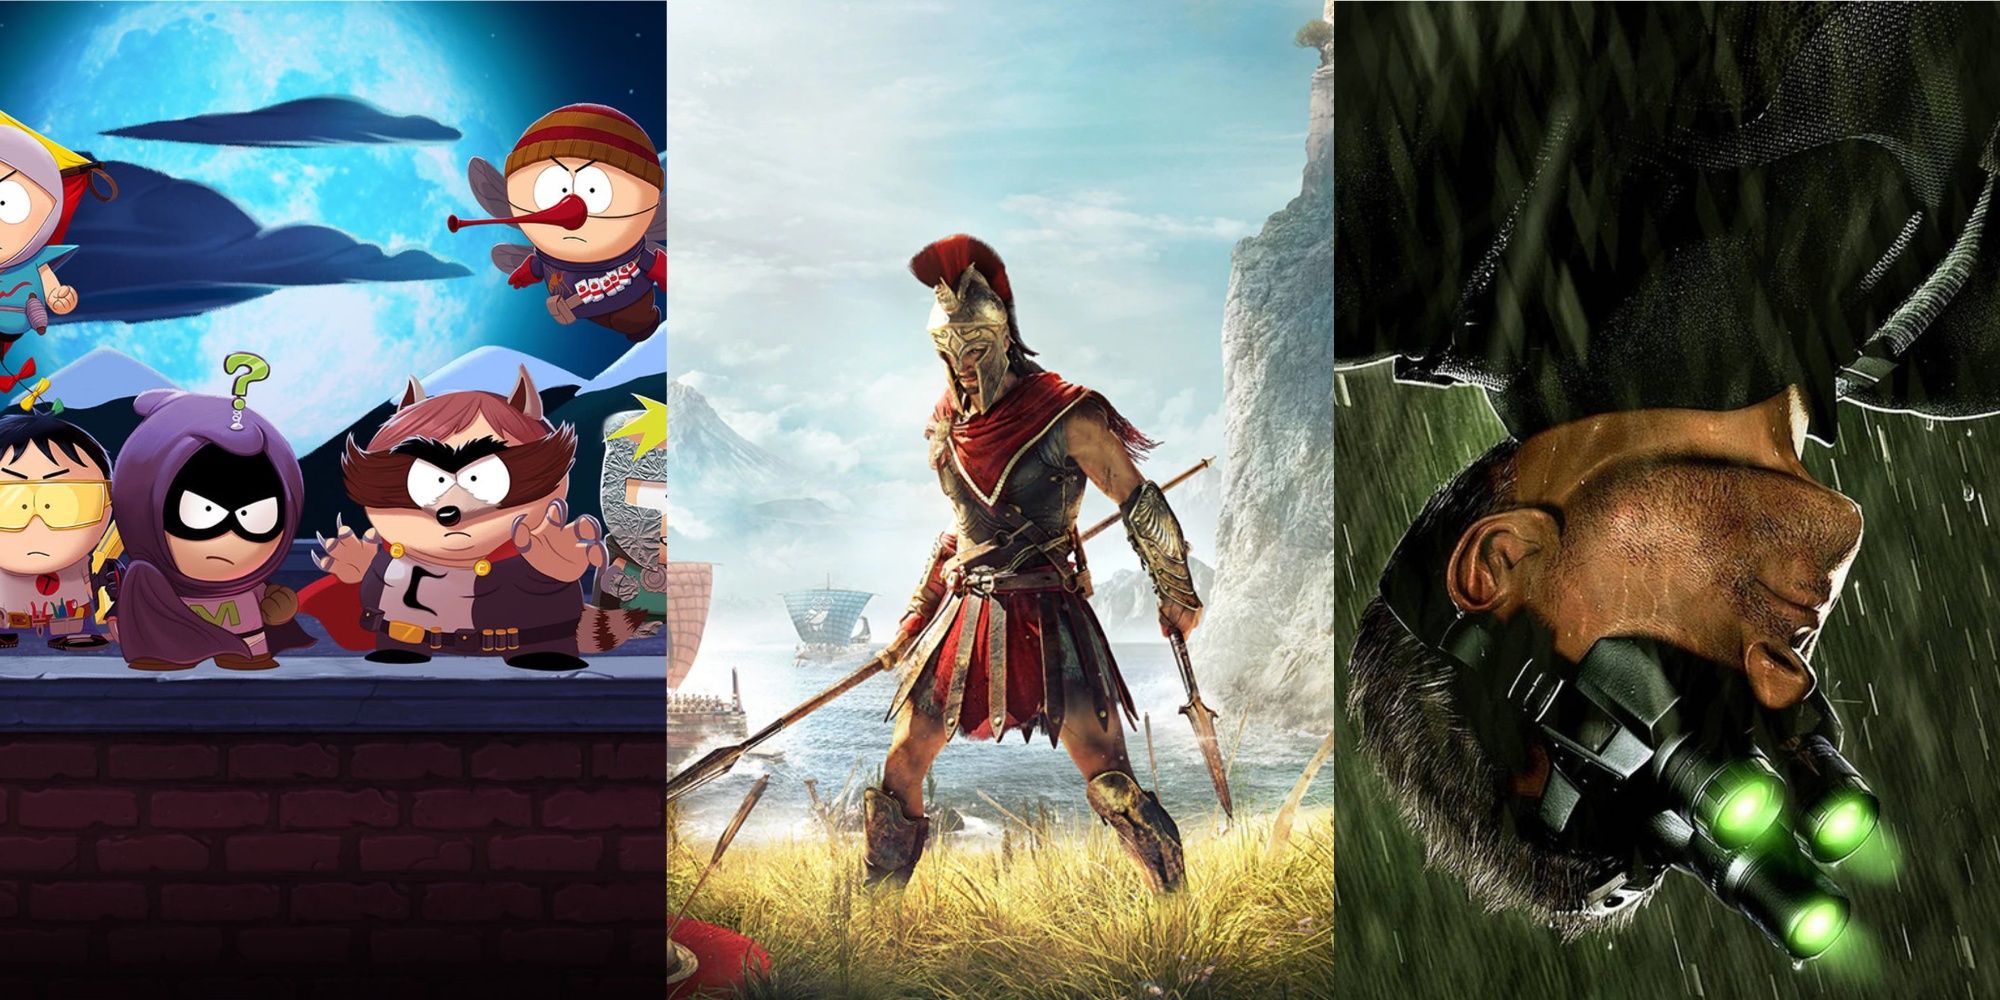 The Best Ubisoft Games - South Park The Fractured But Whole, Assassin's Creed Odyssey and Splinter Cell